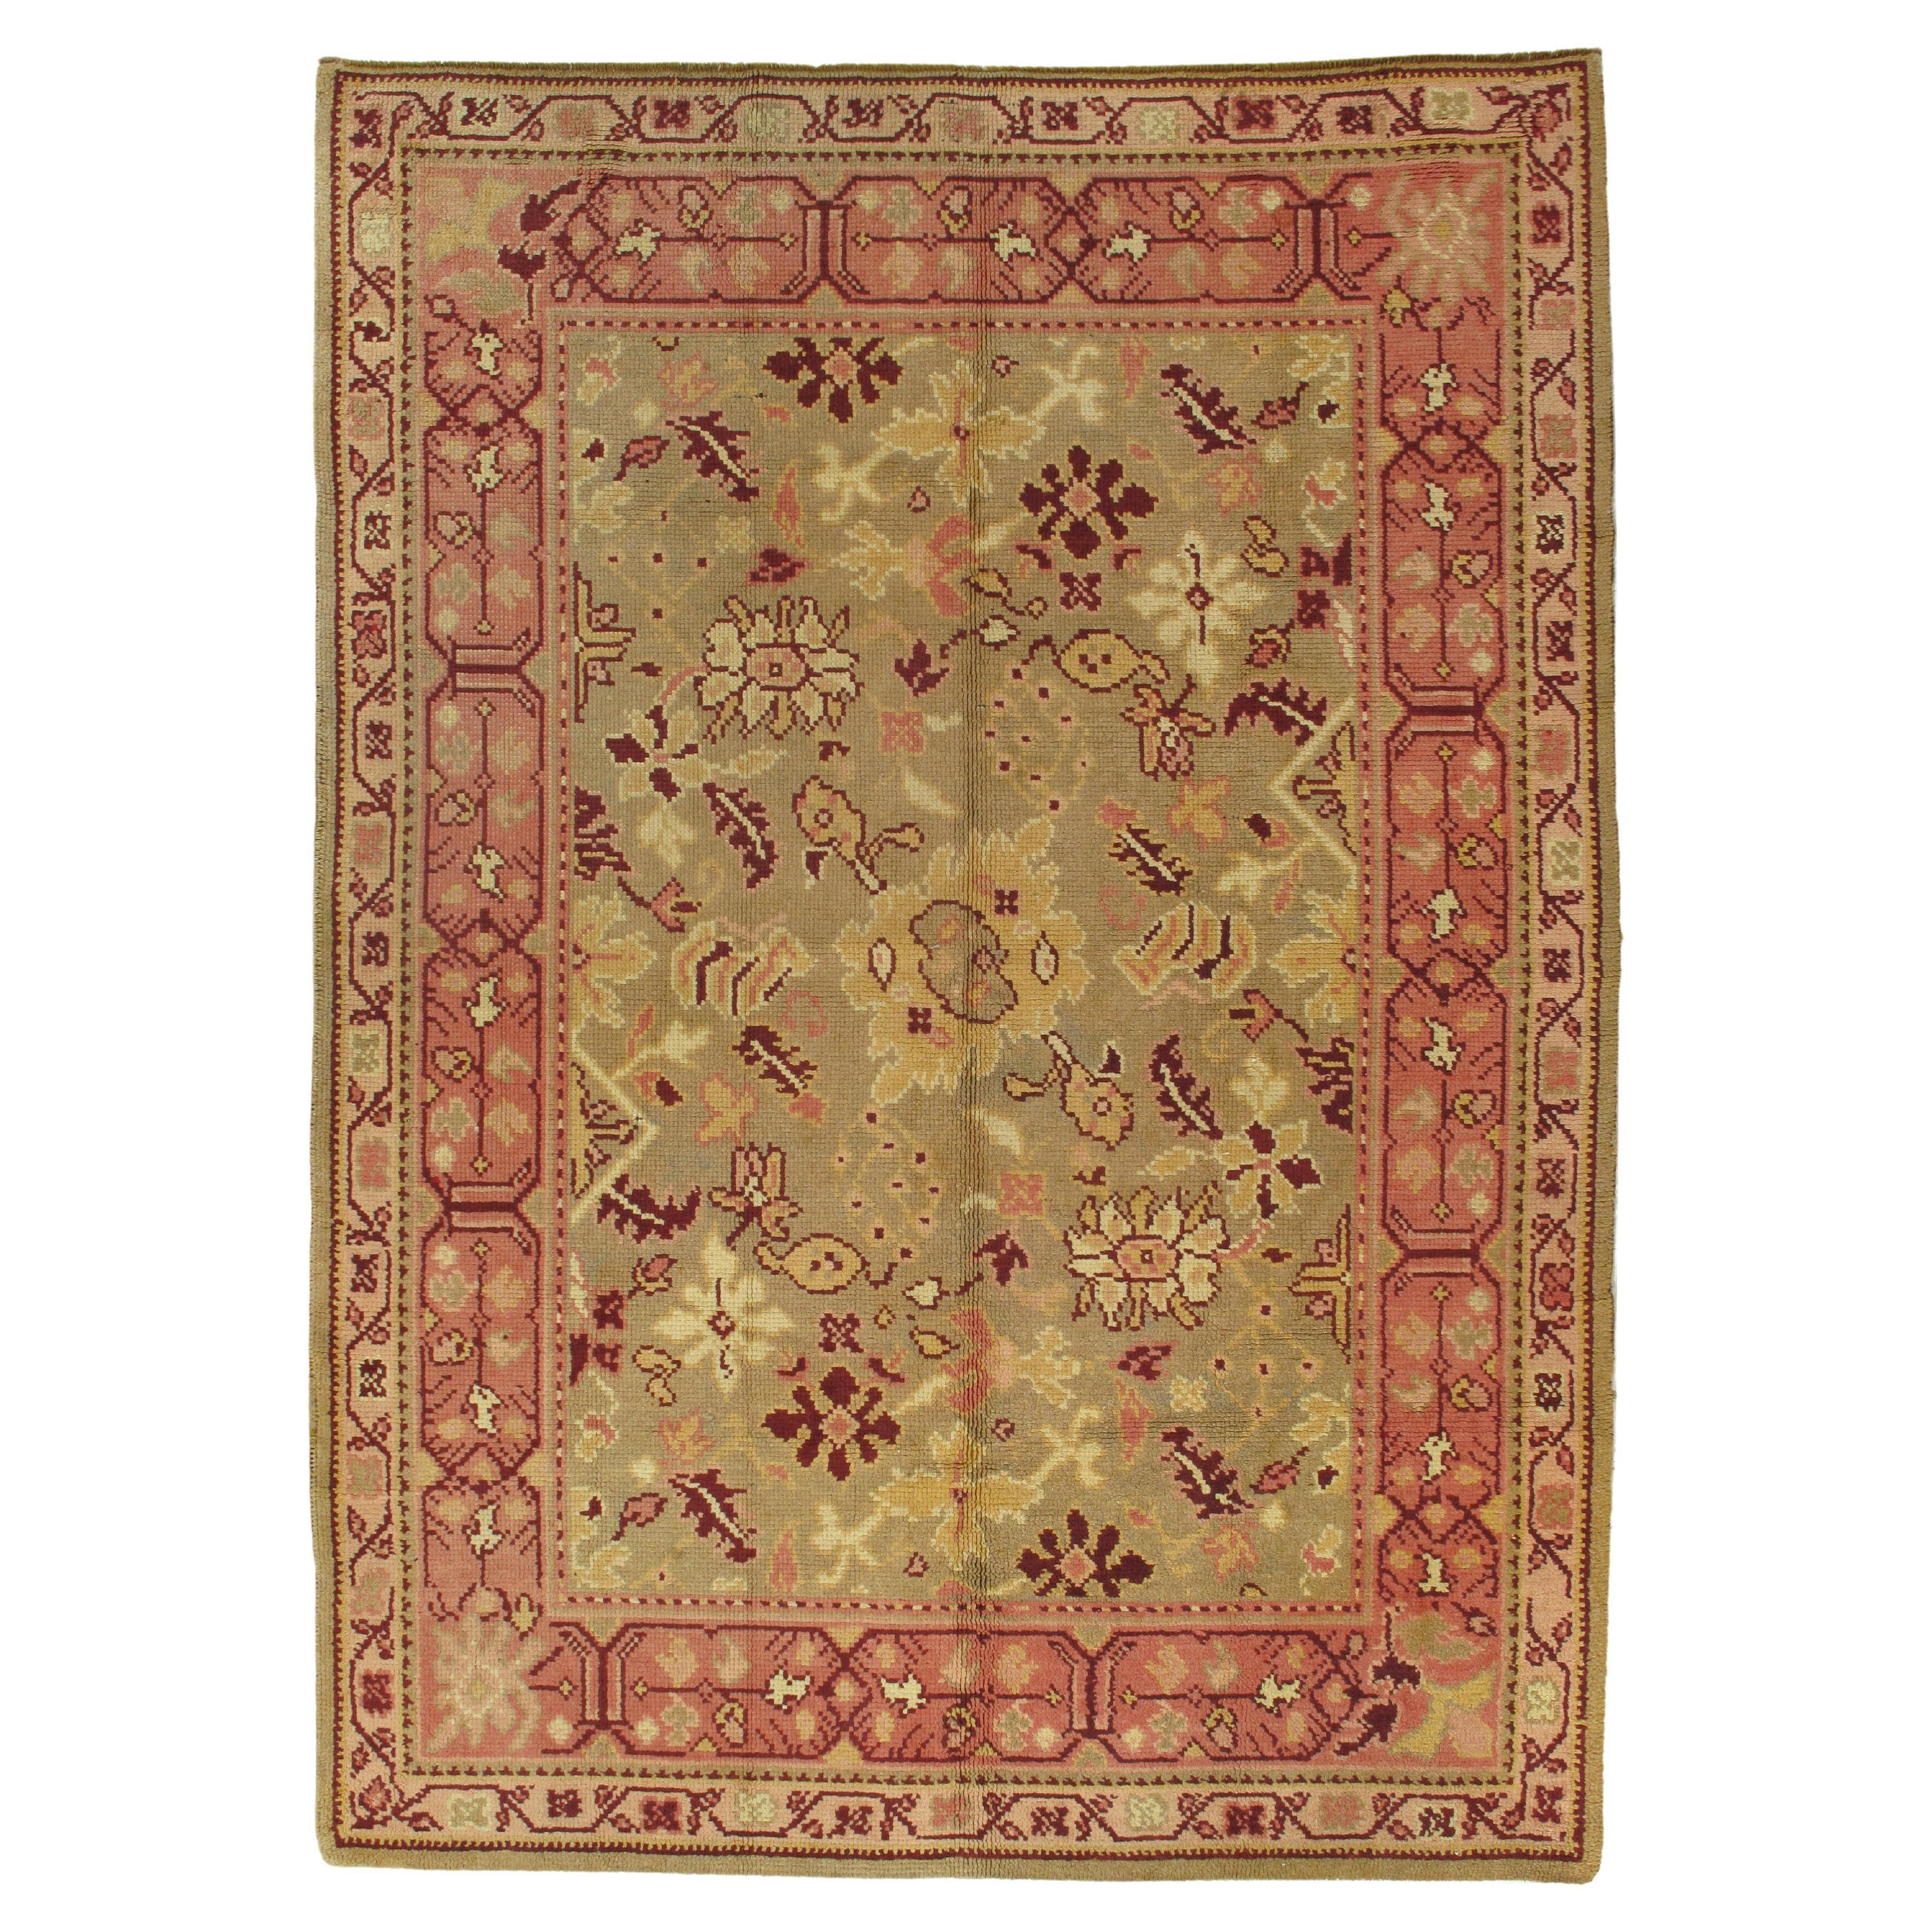 Antique Oushak Carpet, Handmade Oriental Rug, Pale Green, Coral, Taupe and Cream